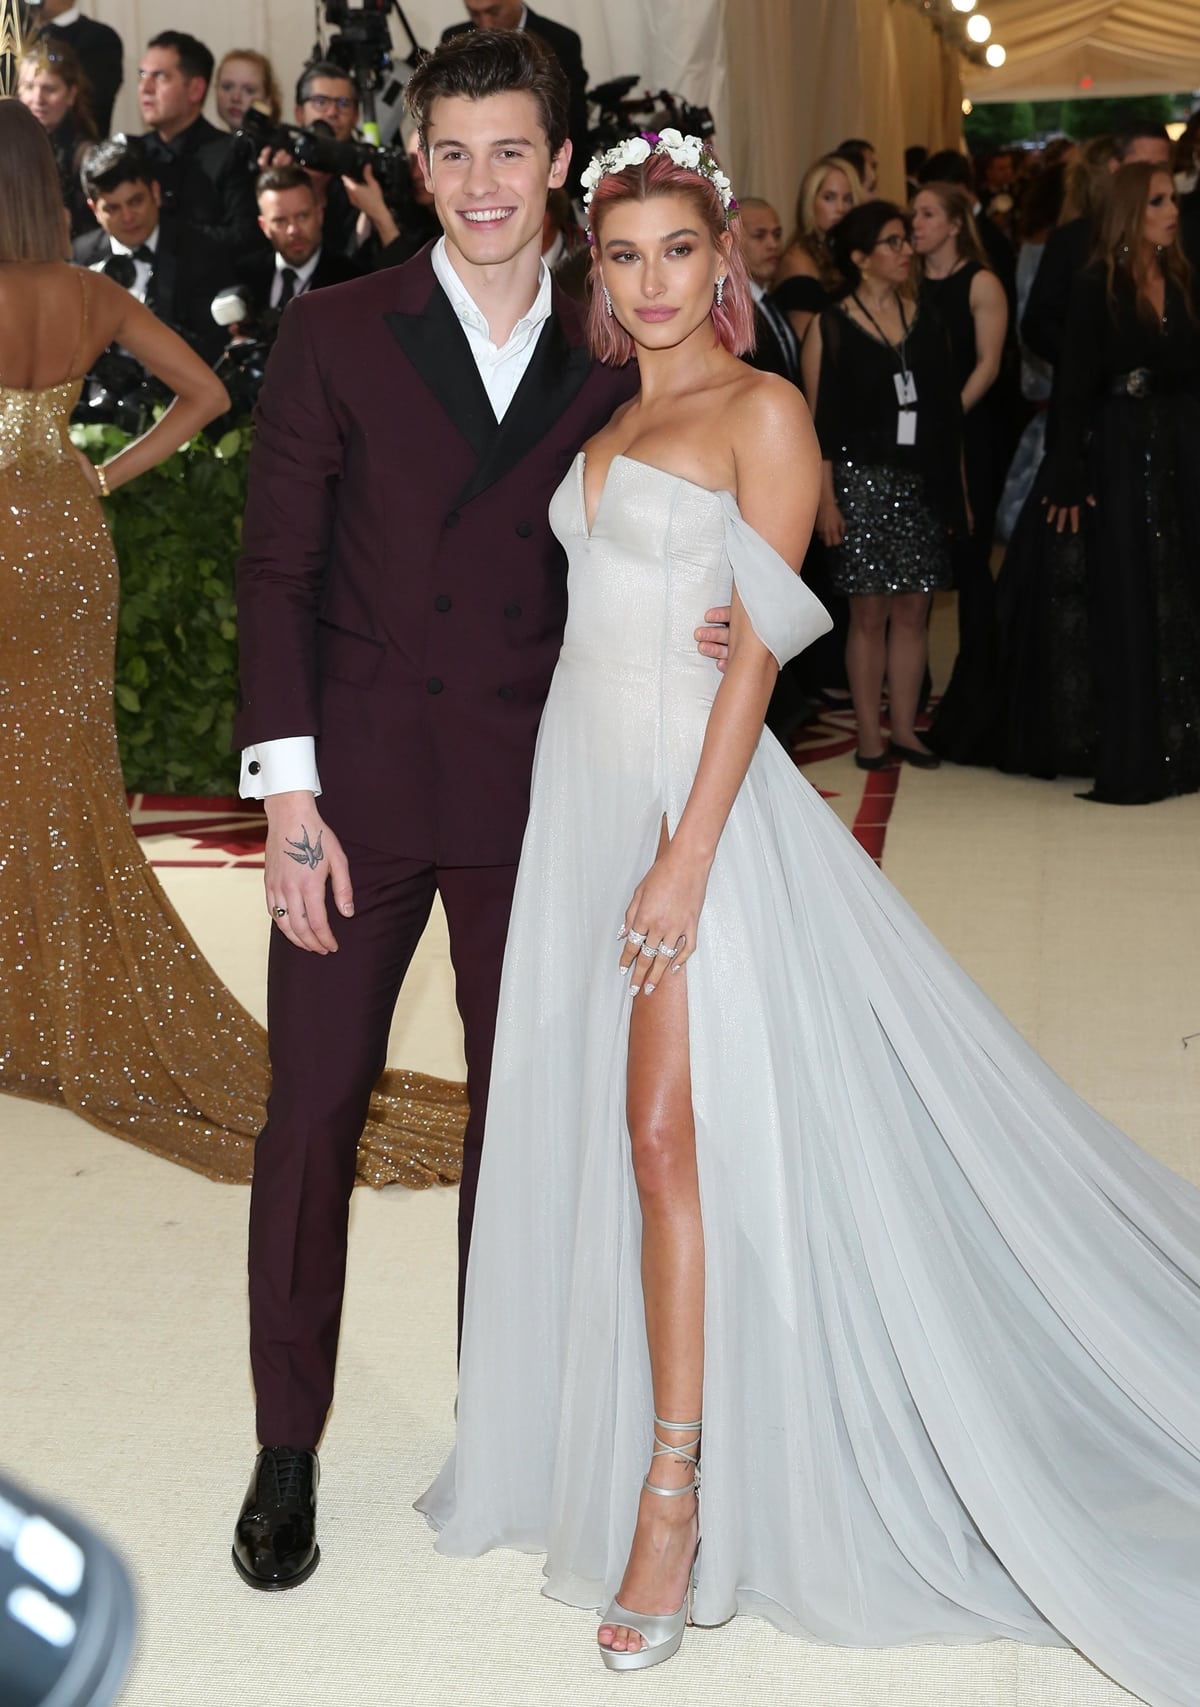 Hailey Baldwin and her boyfriend Shawn Mendes at the 2018 Met Gala